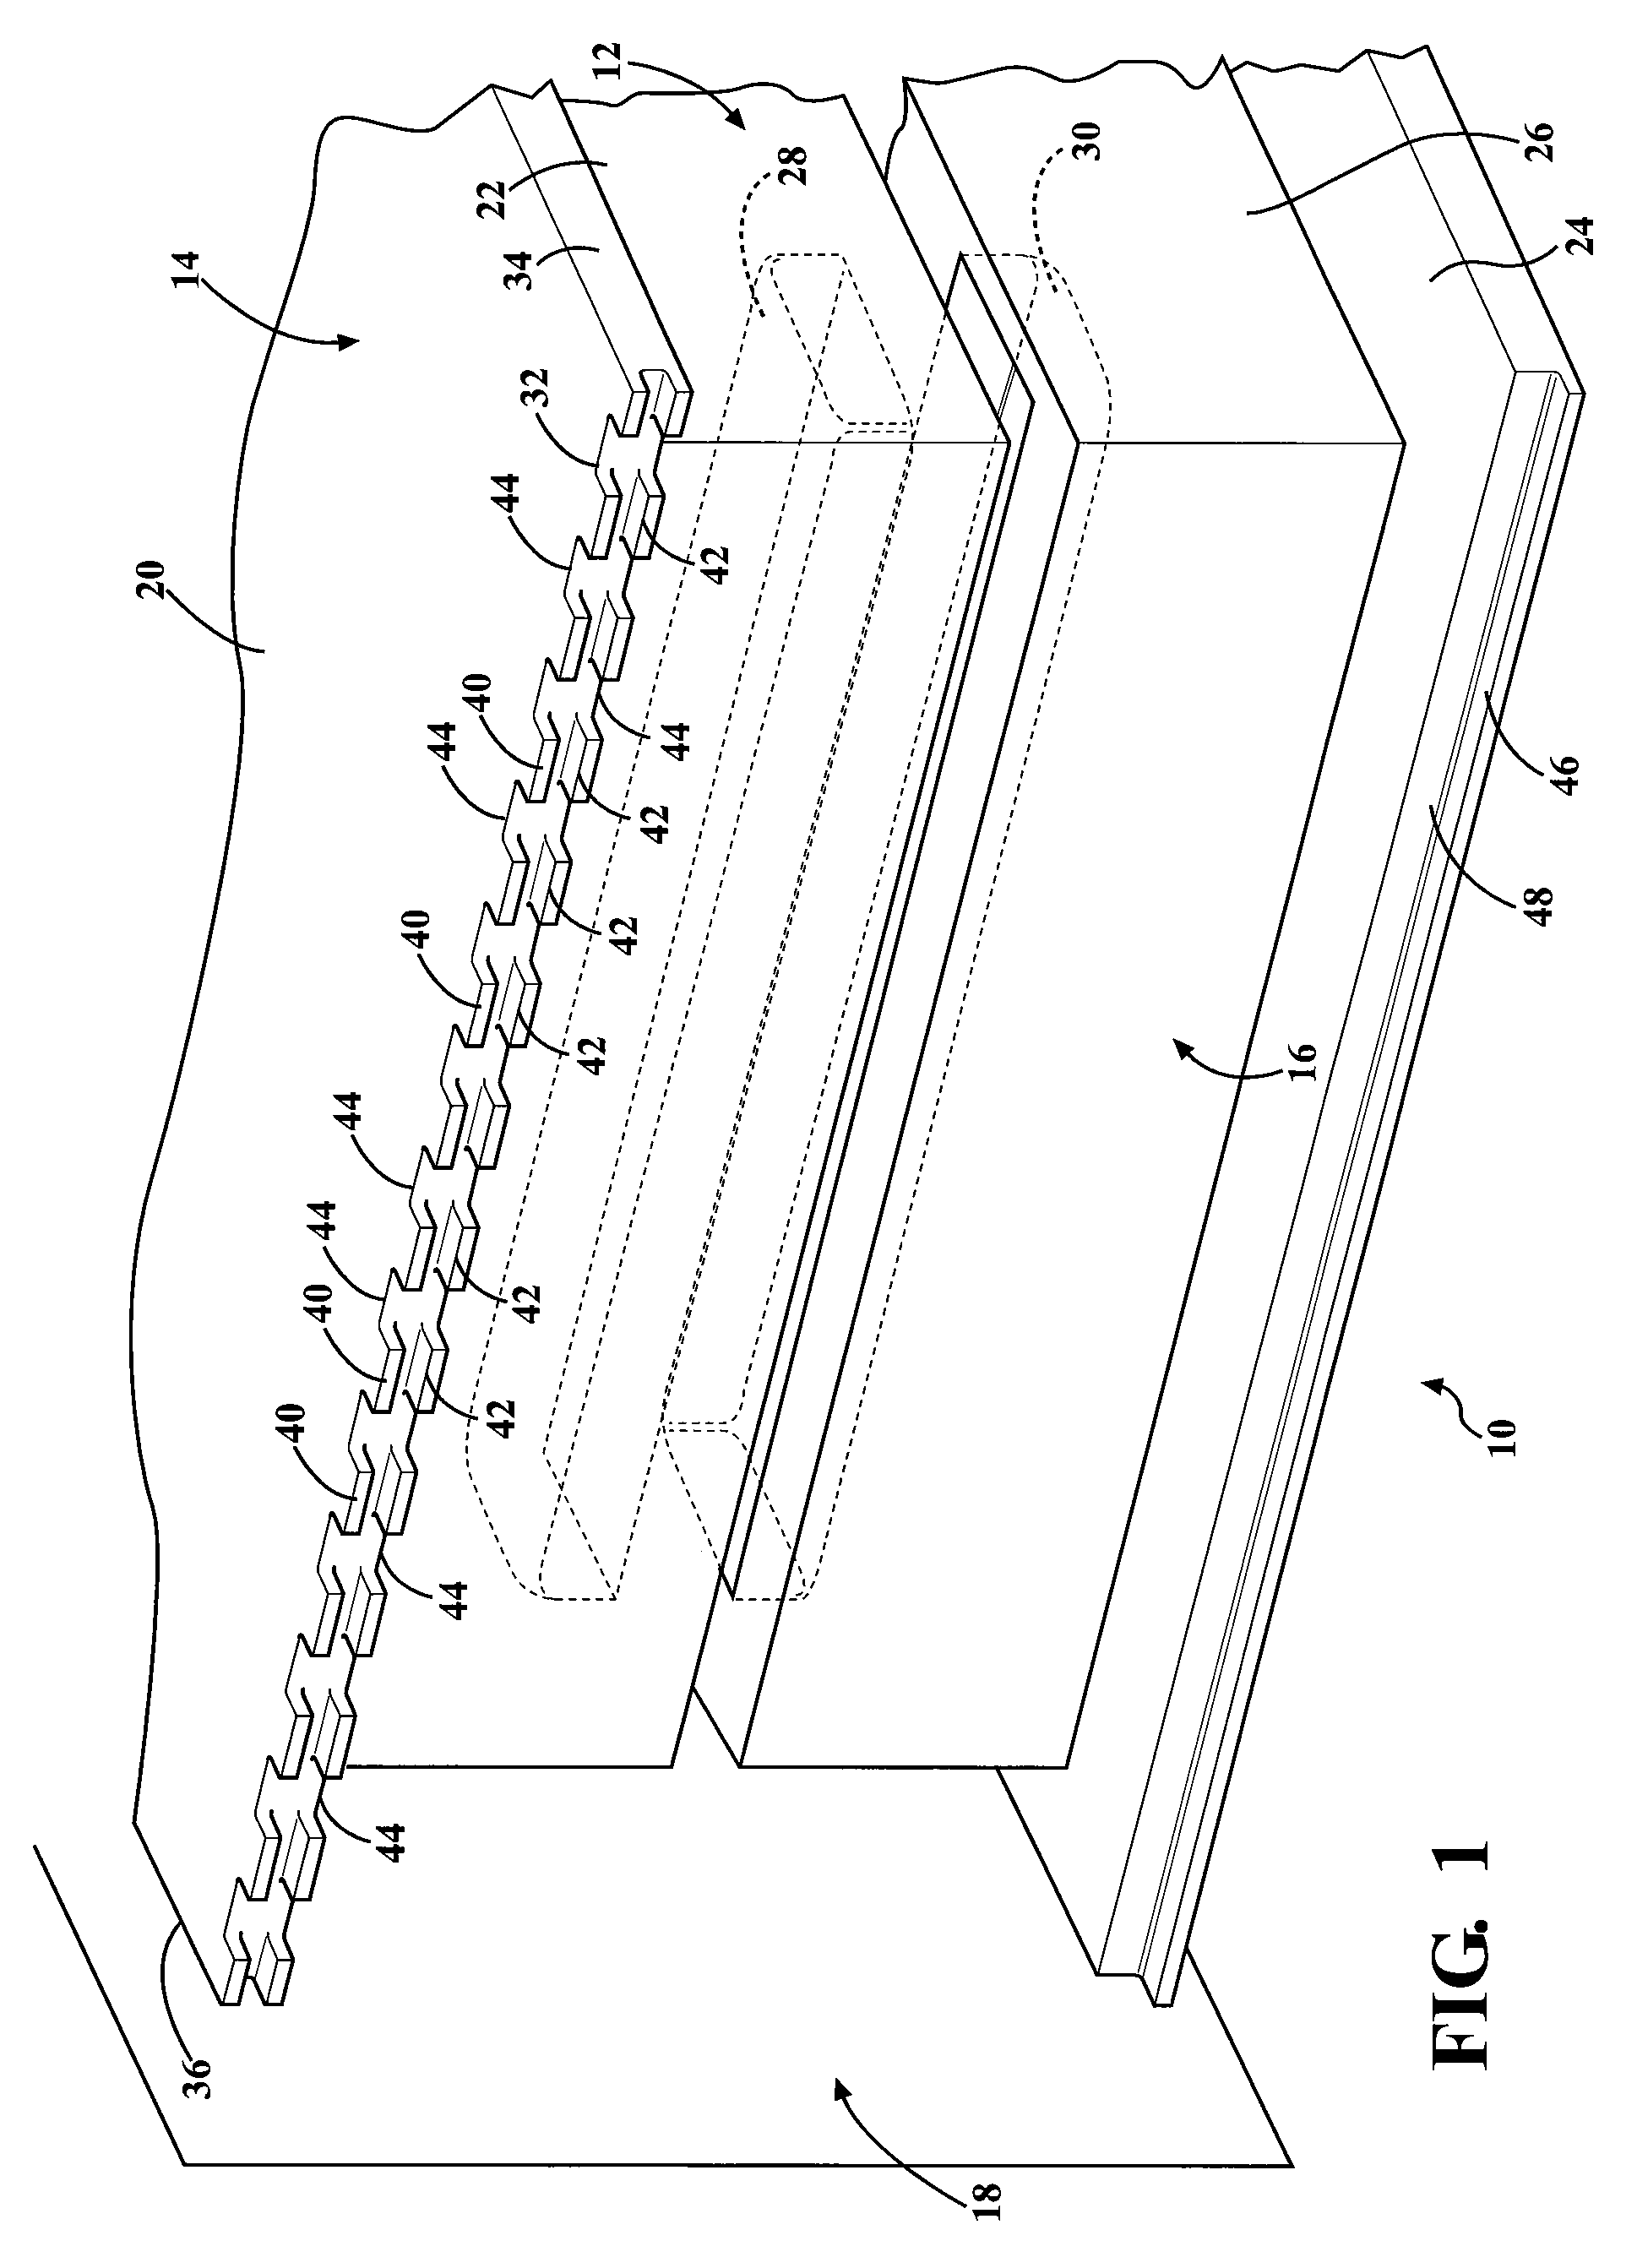 Safety and clamping device for an apparatus for fabricating parts